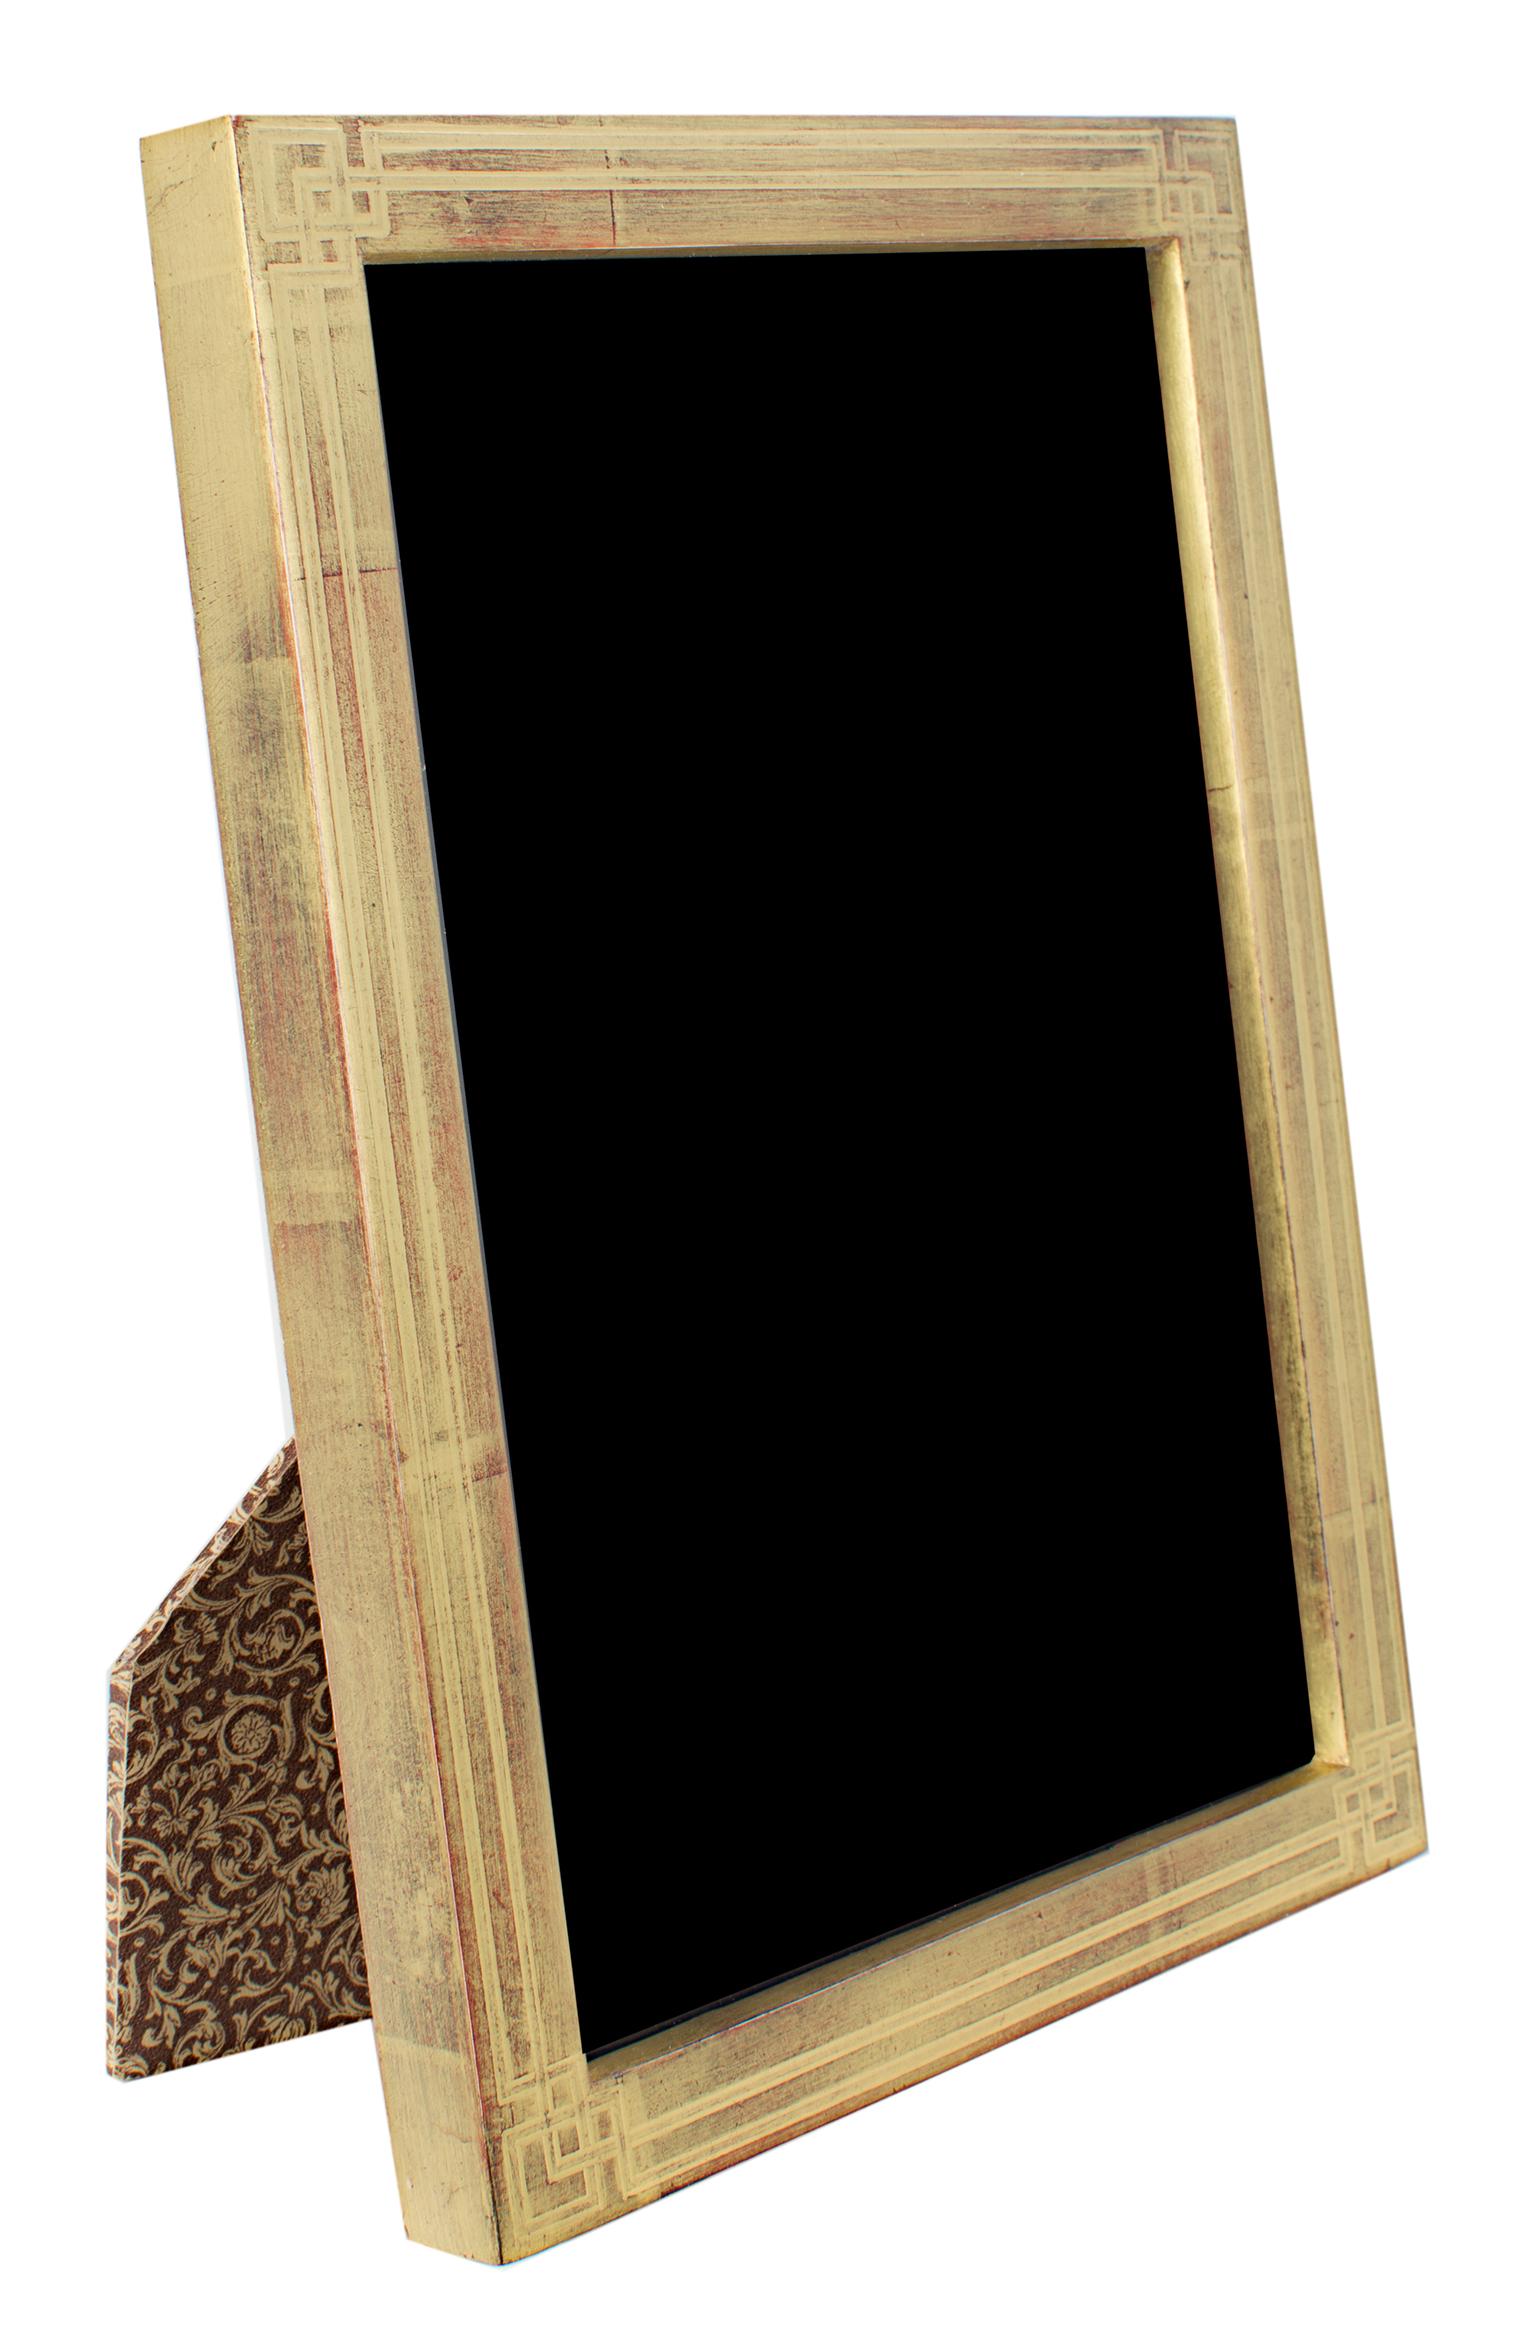 "Romanian Handmade Photo Frame, " 22K Gold Leaf & Wood 5 x 7 in Frame - Art by Unknown